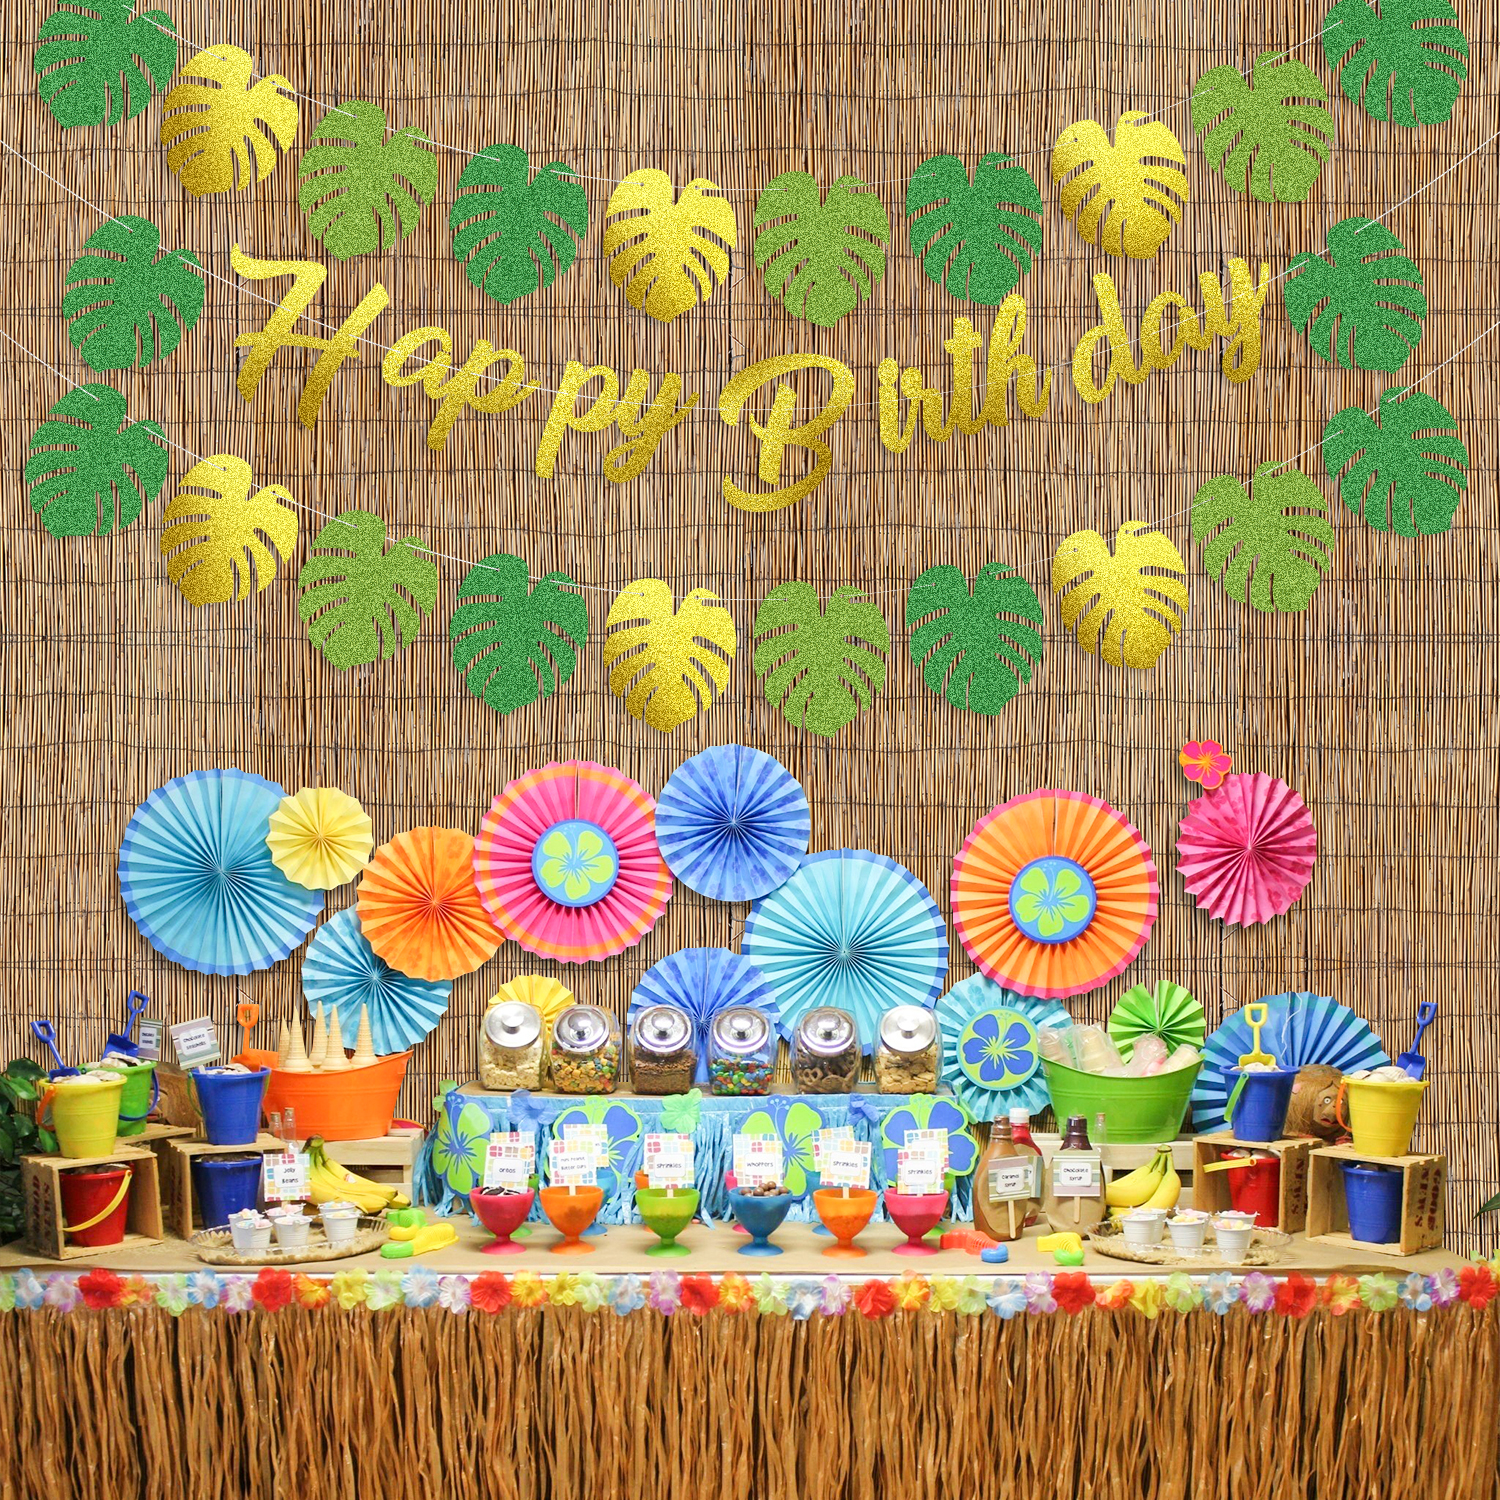 Tropical Birthday Party Decorations - 3 Set Hawaiian Happy Birthday Banners, Gold and Green Glittery Tropical Palm Leaf Garland, Summer Jungle Beach Luau Hawaiian Birthday Party Decorations - image 3 of 8